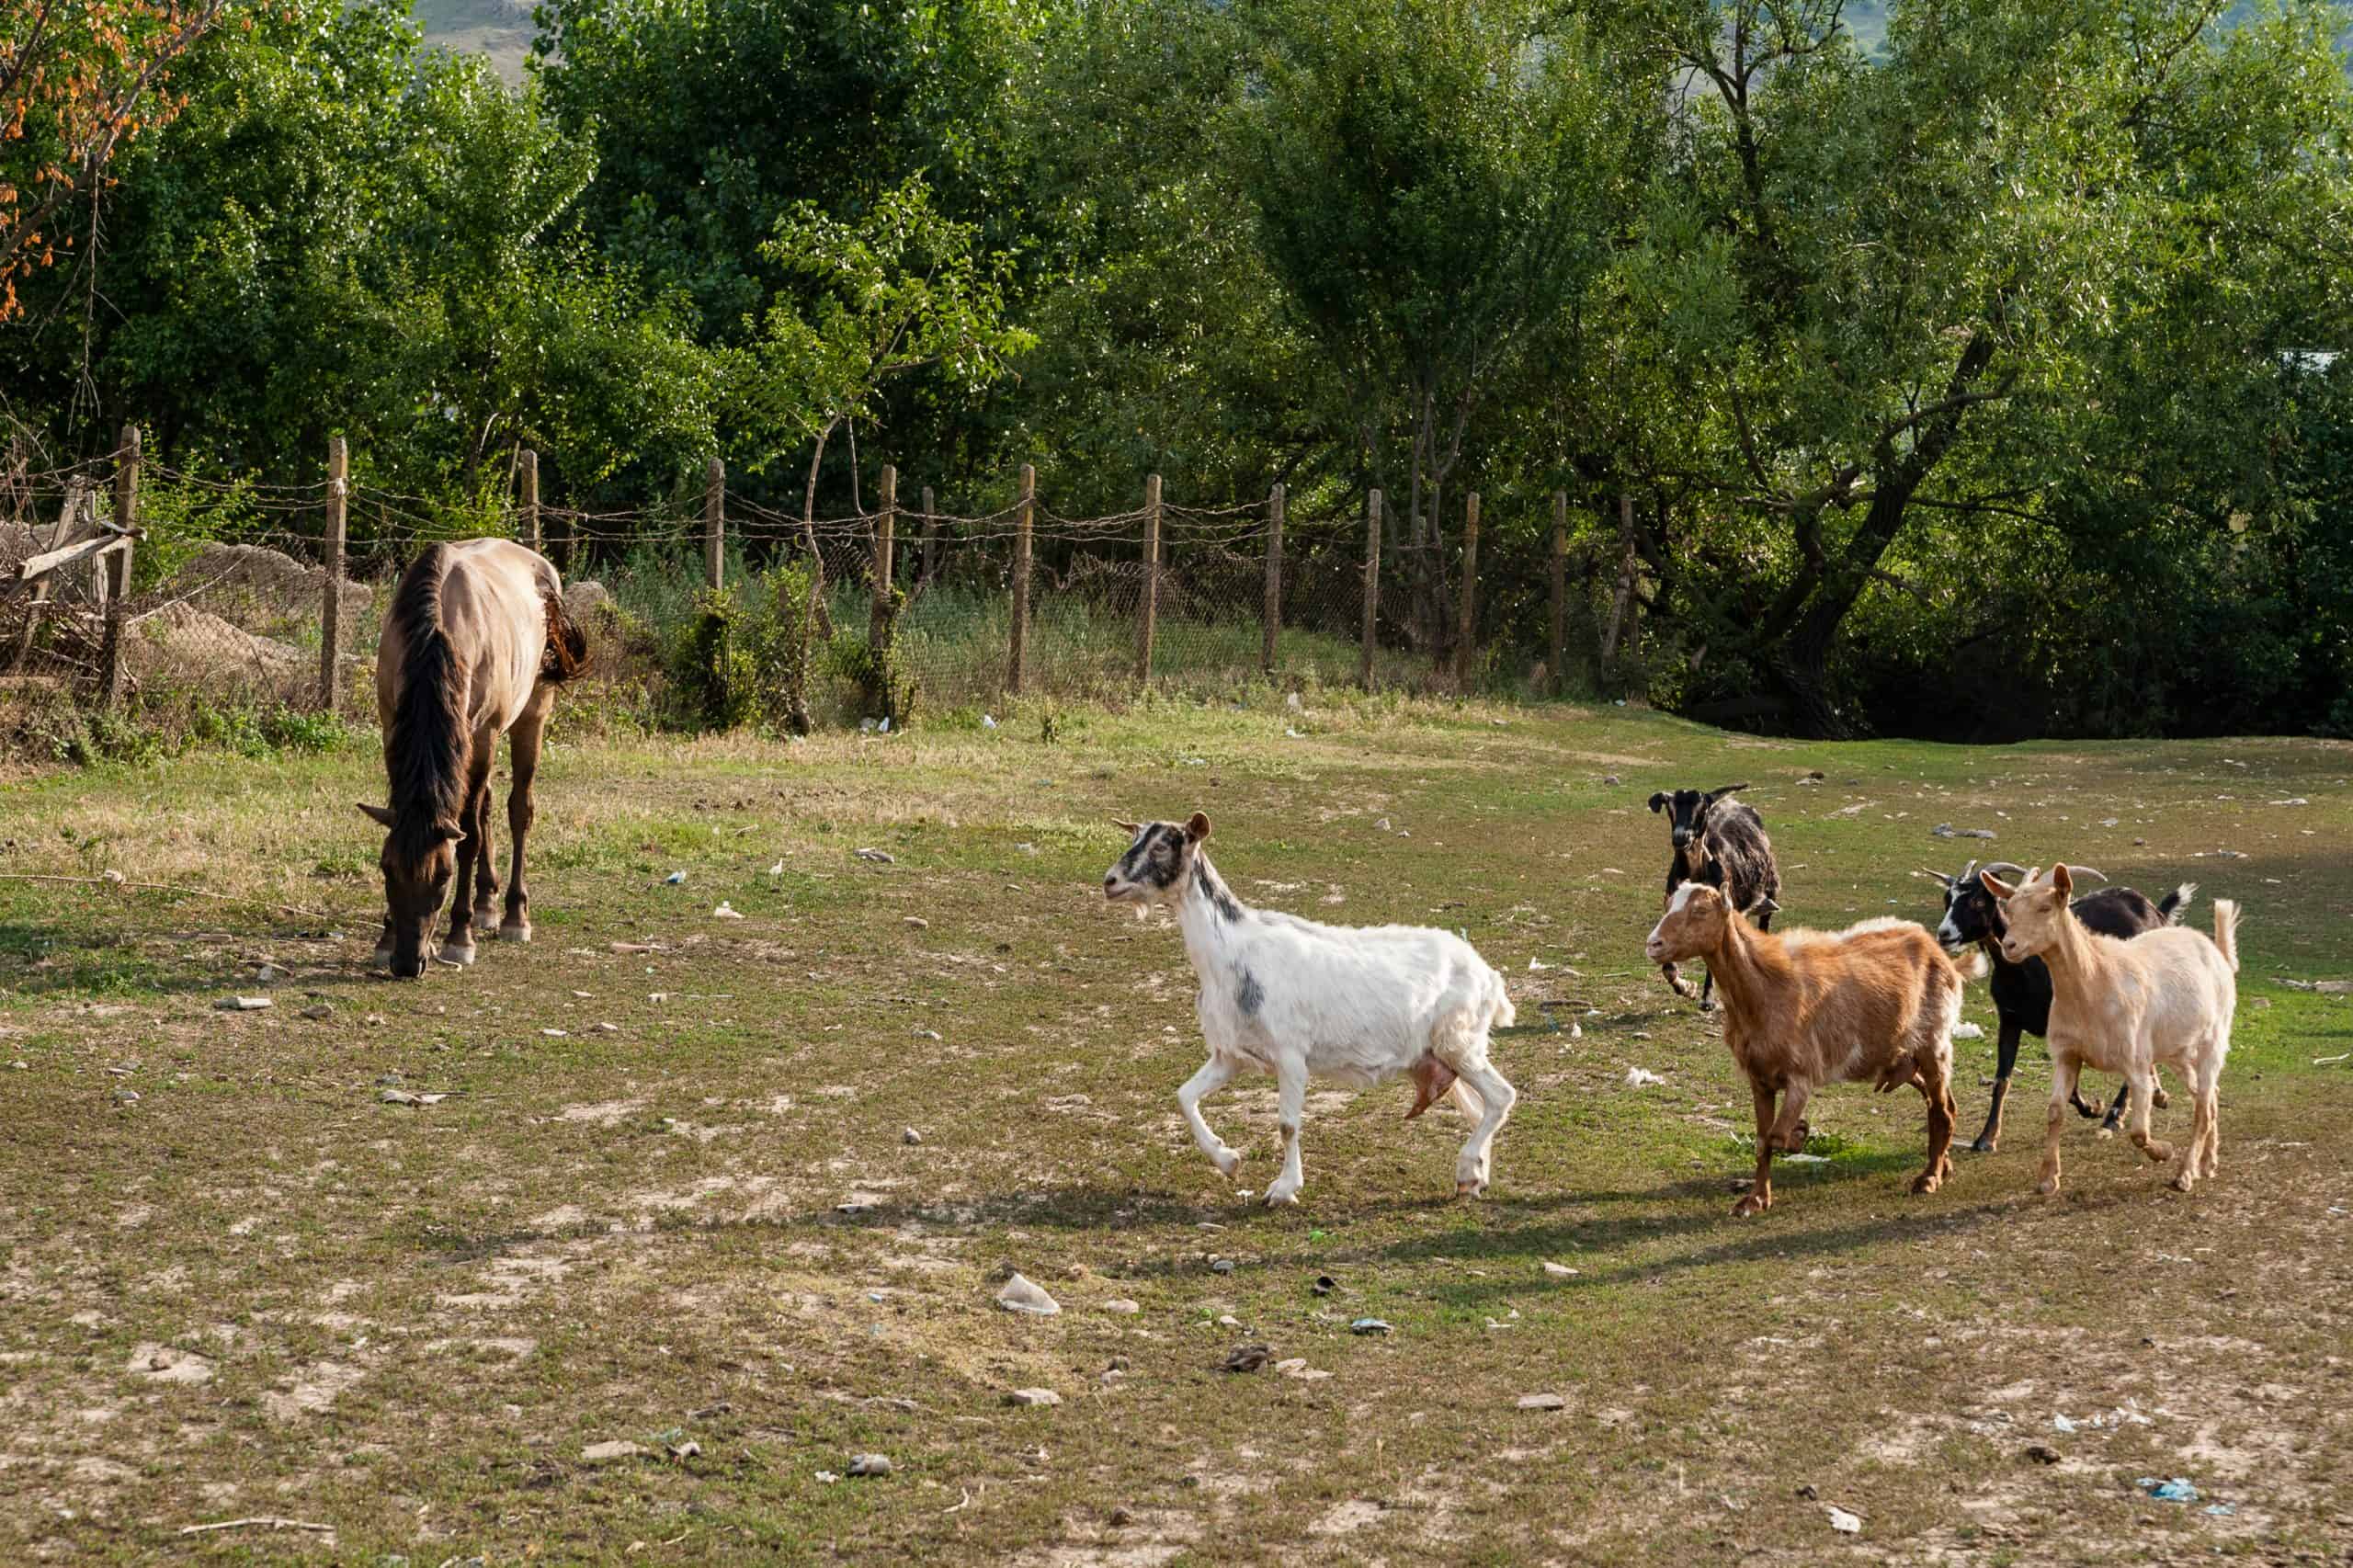 A horse is pasturing on a lawn while some goats walk past it.